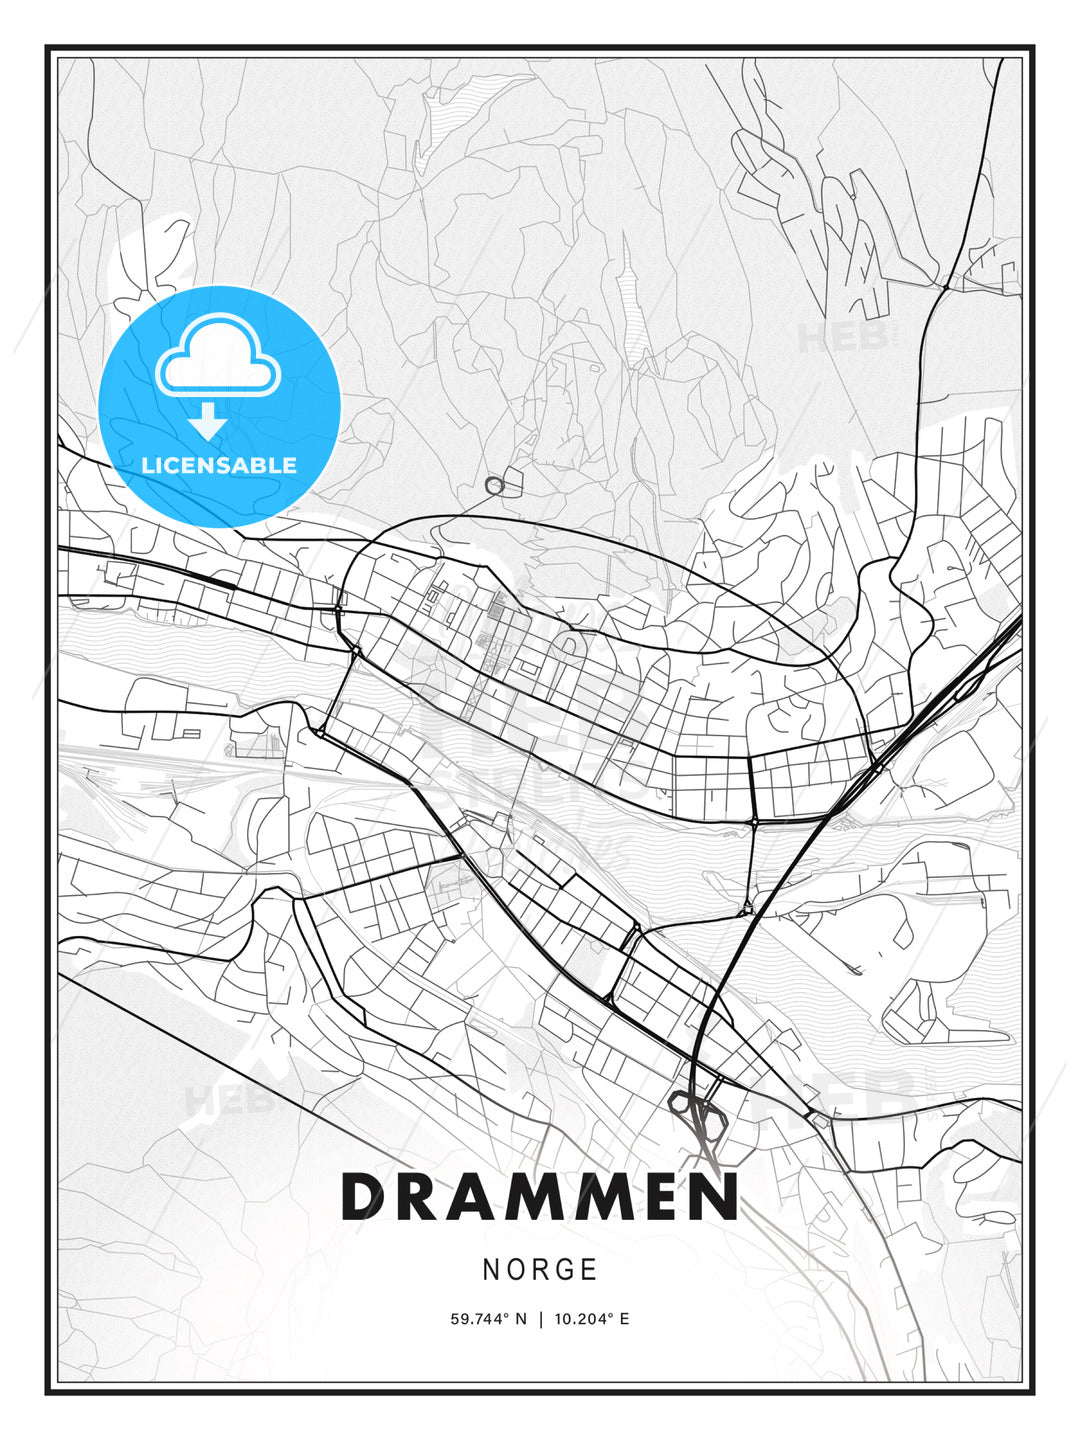 Drammen, Norway, Modern Print Template in Various Formats - HEBSTREITS Sketches